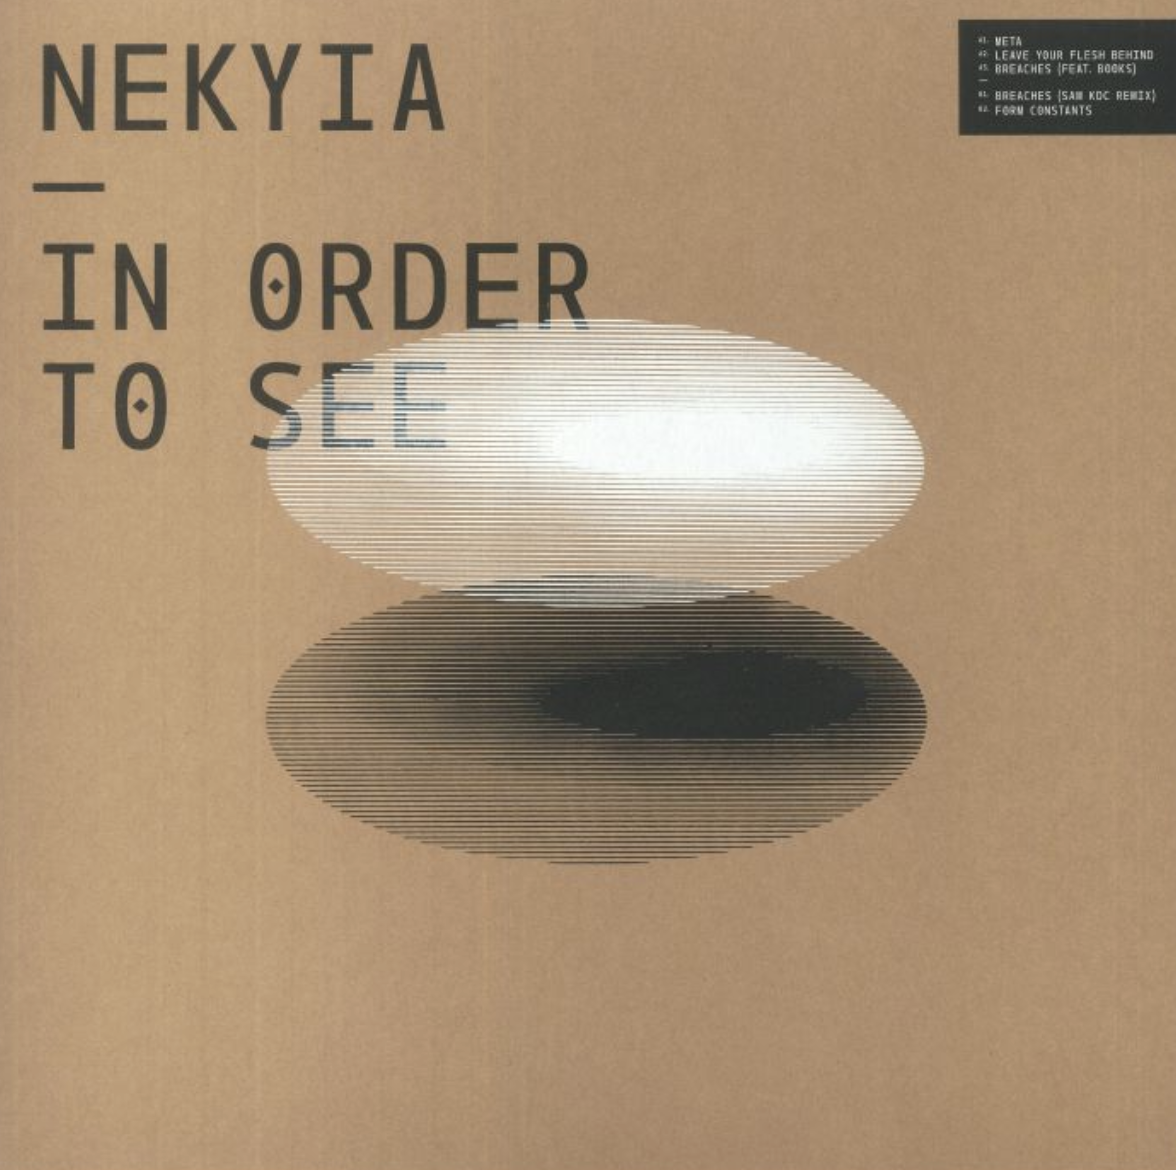 NEKYIA - In Order To See (Sam KDC mix)